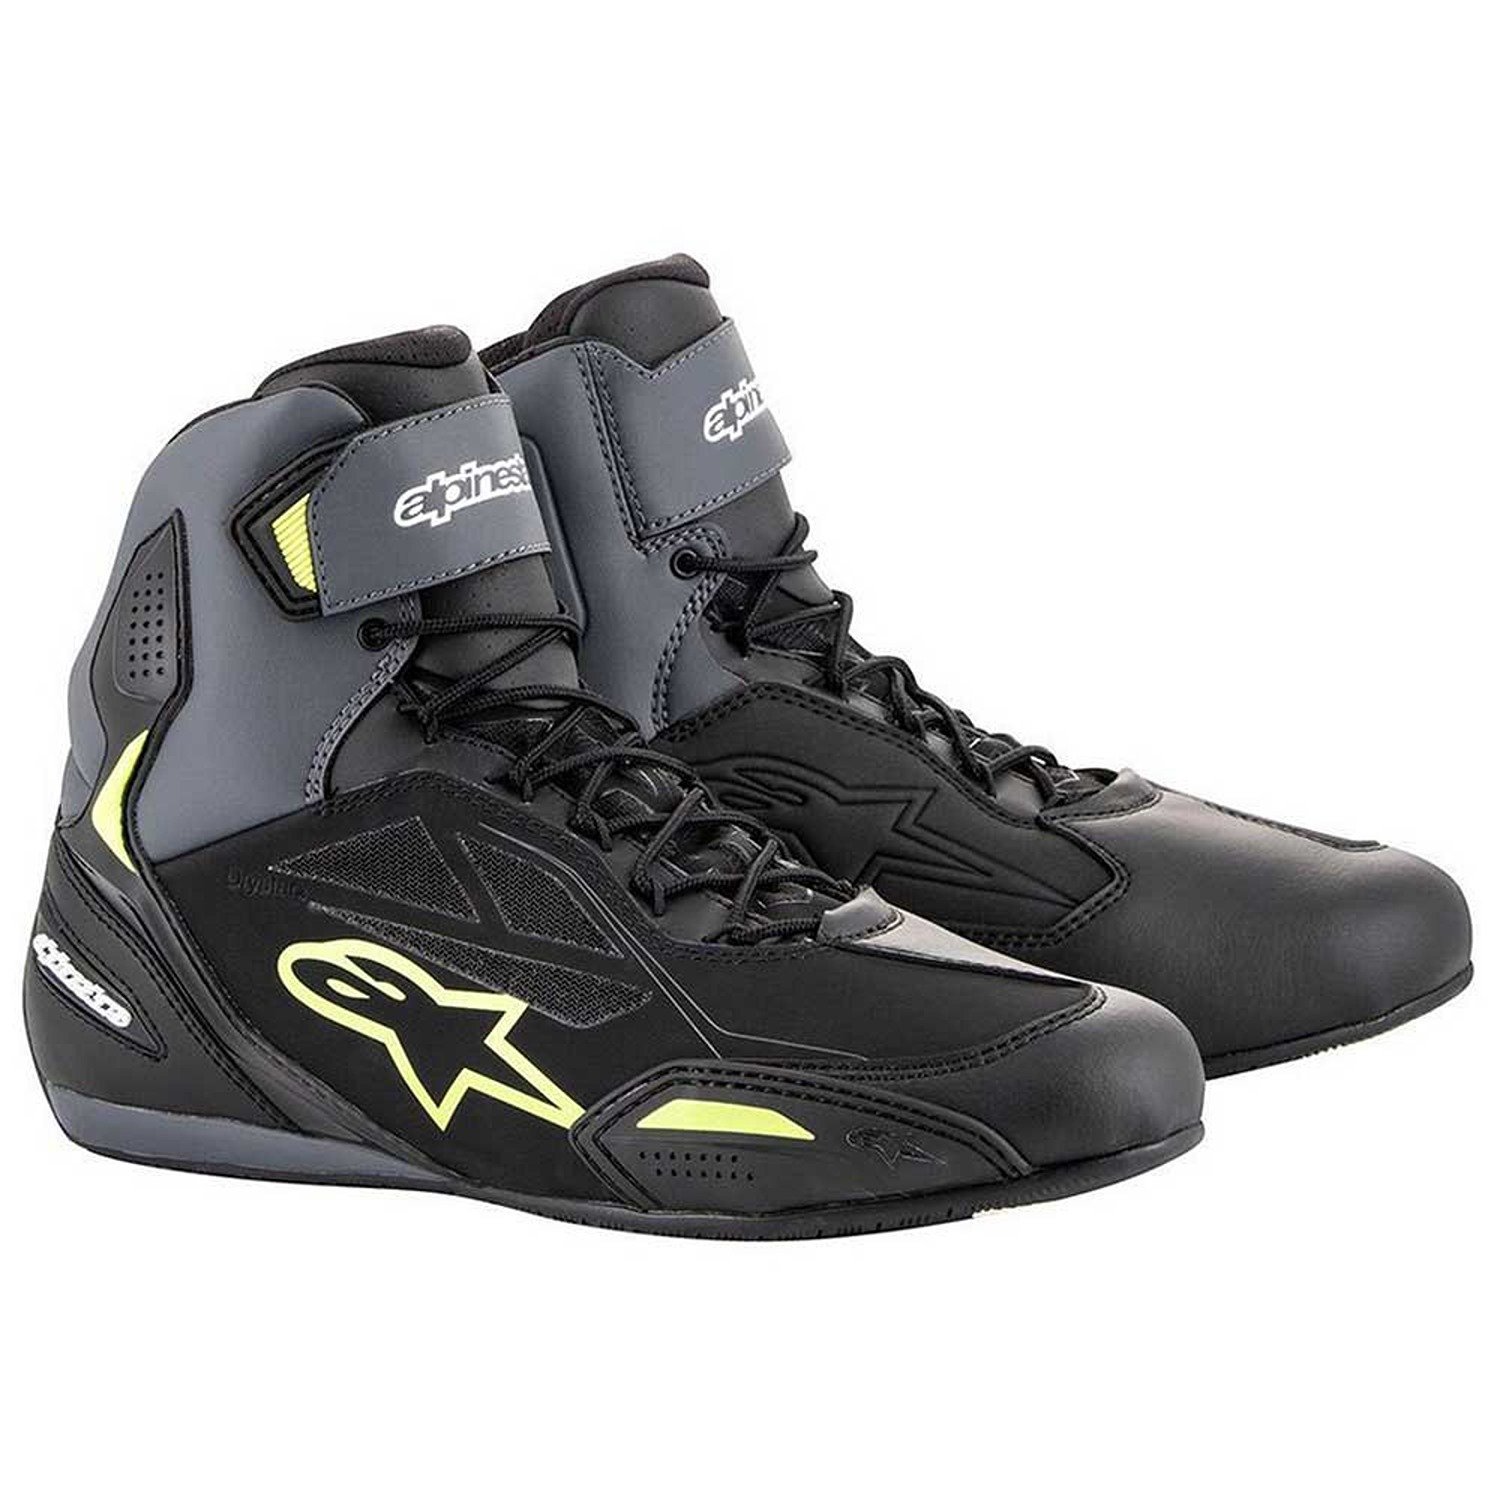 Image of EU Alpinestars Faster-3 Shoes Black Yellow Fluo Taille US 12